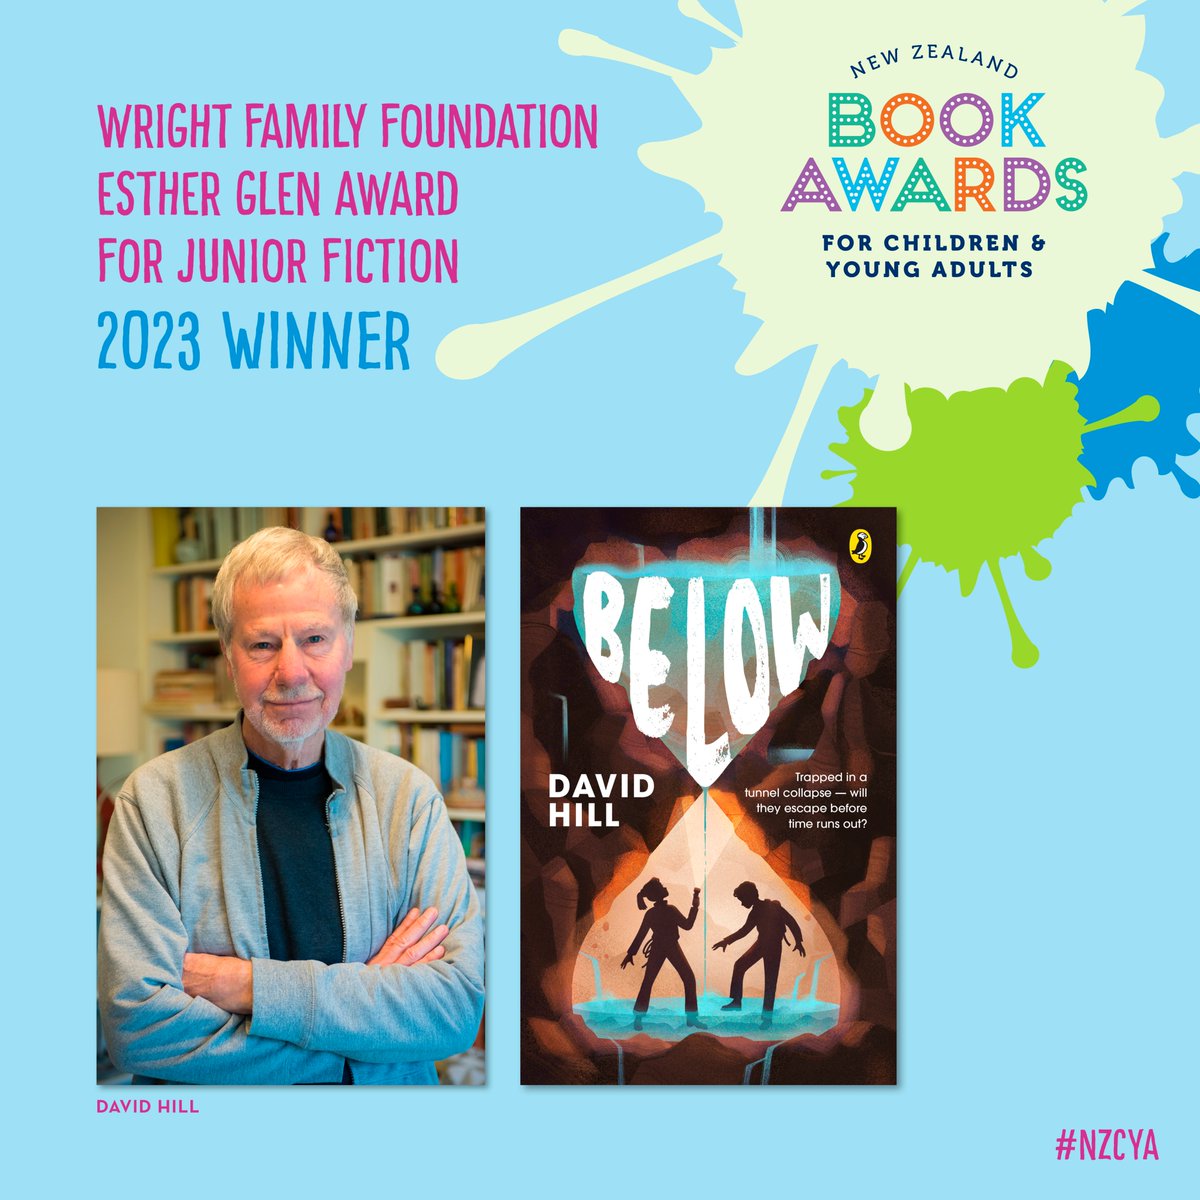 The winner of the Wright Family Foundation Esther Glen Award is ‘Below’ by David Hill published by @PenguinBooks_NZ “A white-knuckled, powerful read, from one of Aotearoa’s most exceptional storytellers.” #NZCYA #BooksAlive